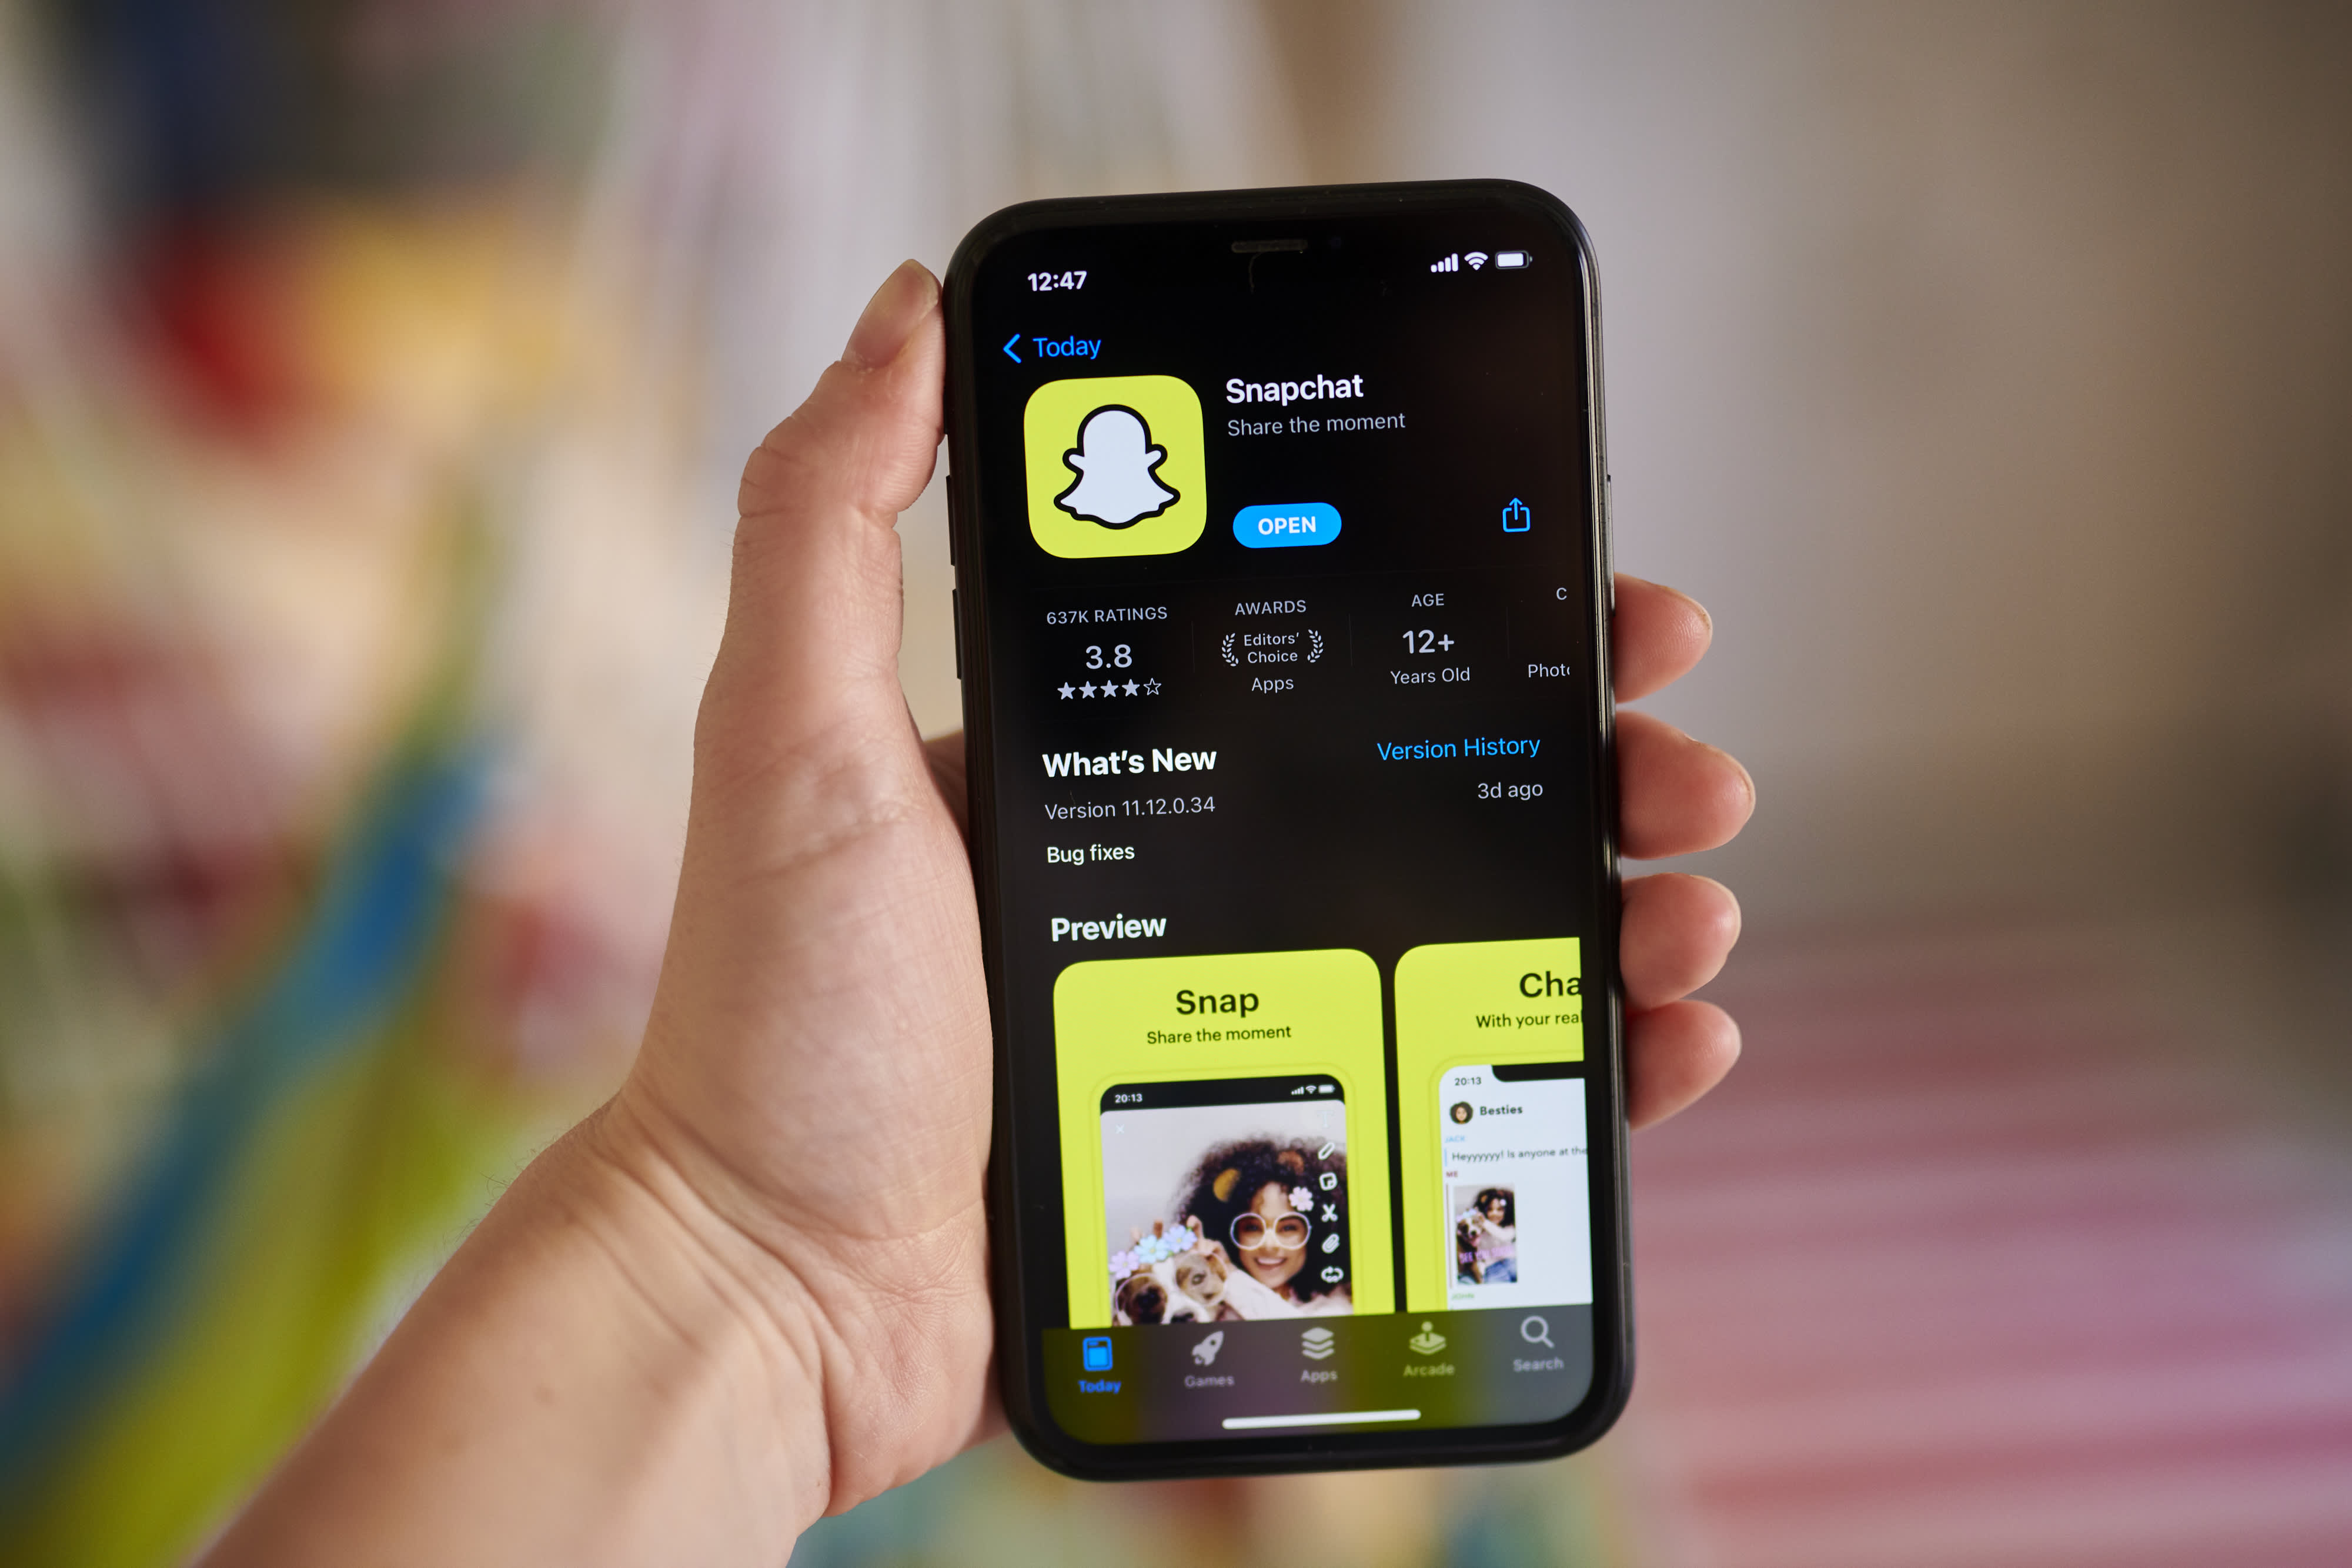 The NBA will play a key role in Snap’s pursuit of 50% revenue growth